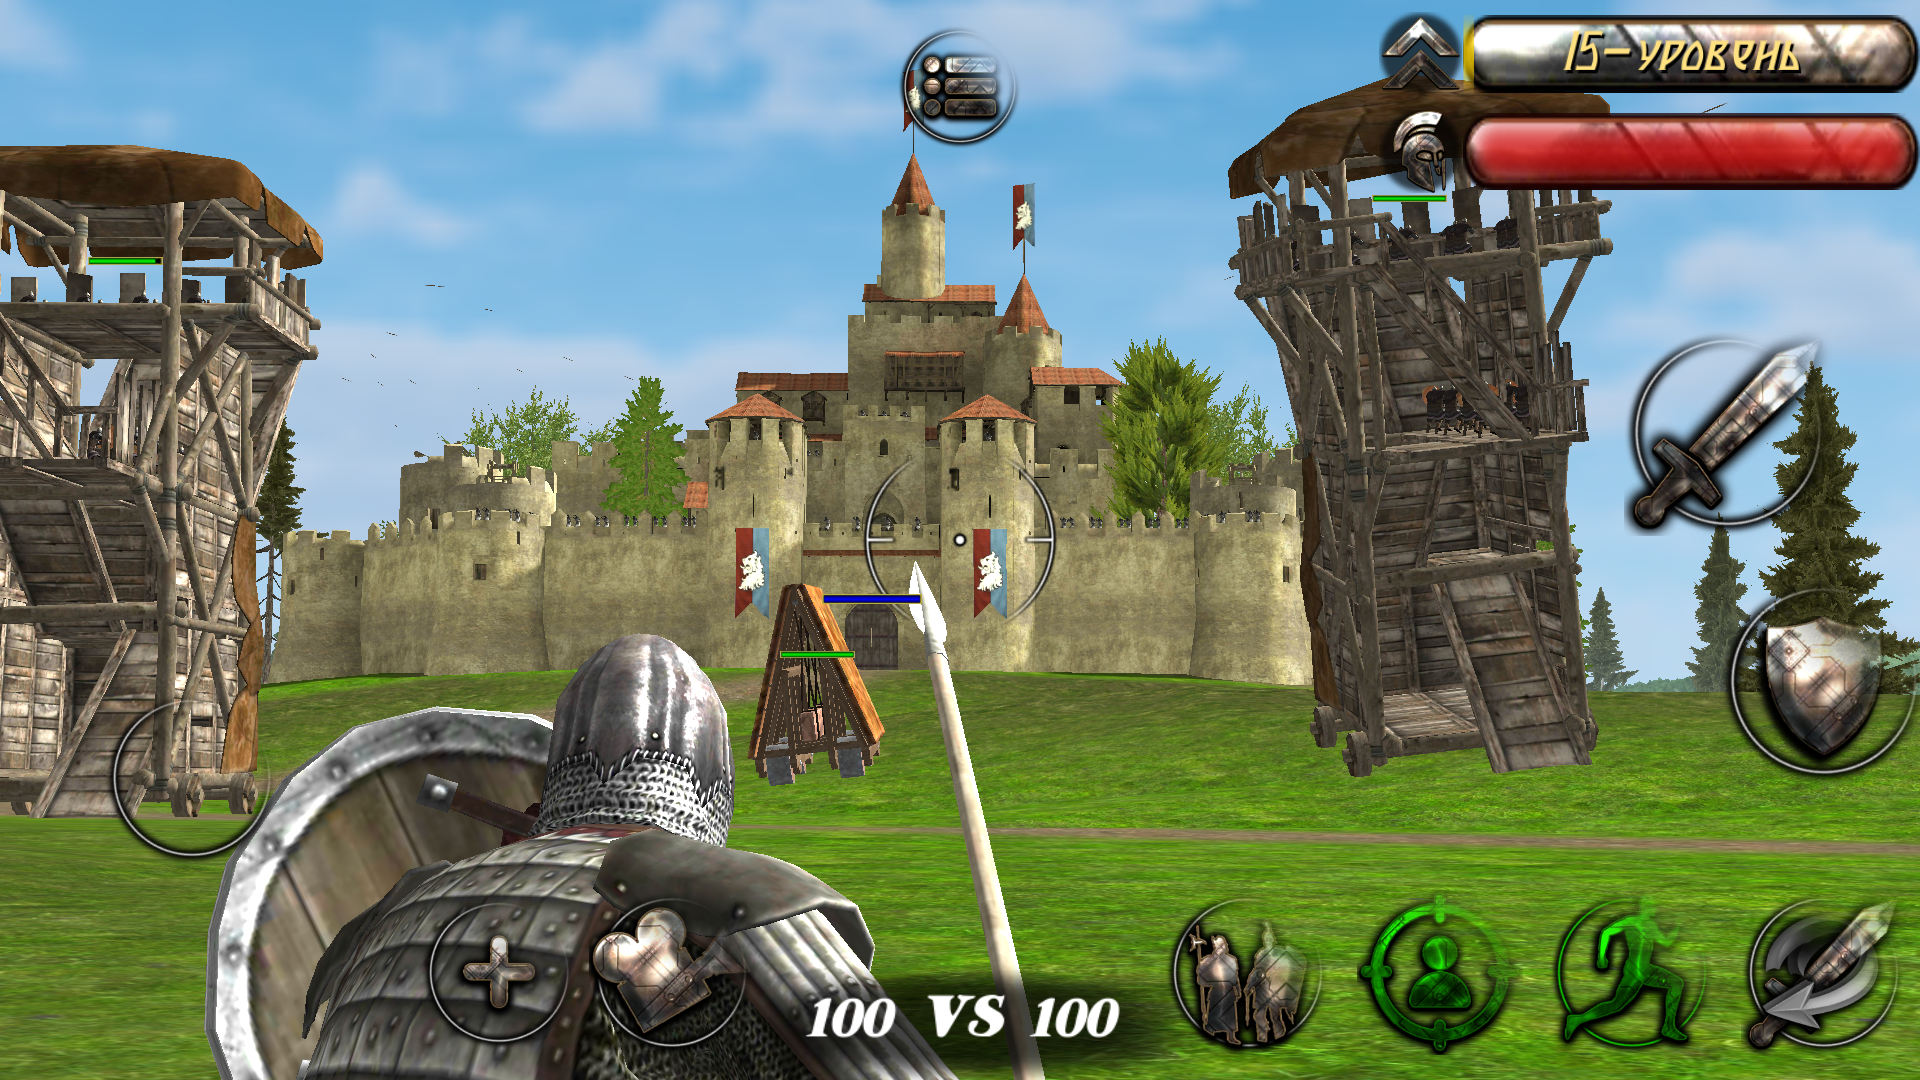 Steel And Flesh v2.2.75 MOD APK (Unlimited Money/Army)